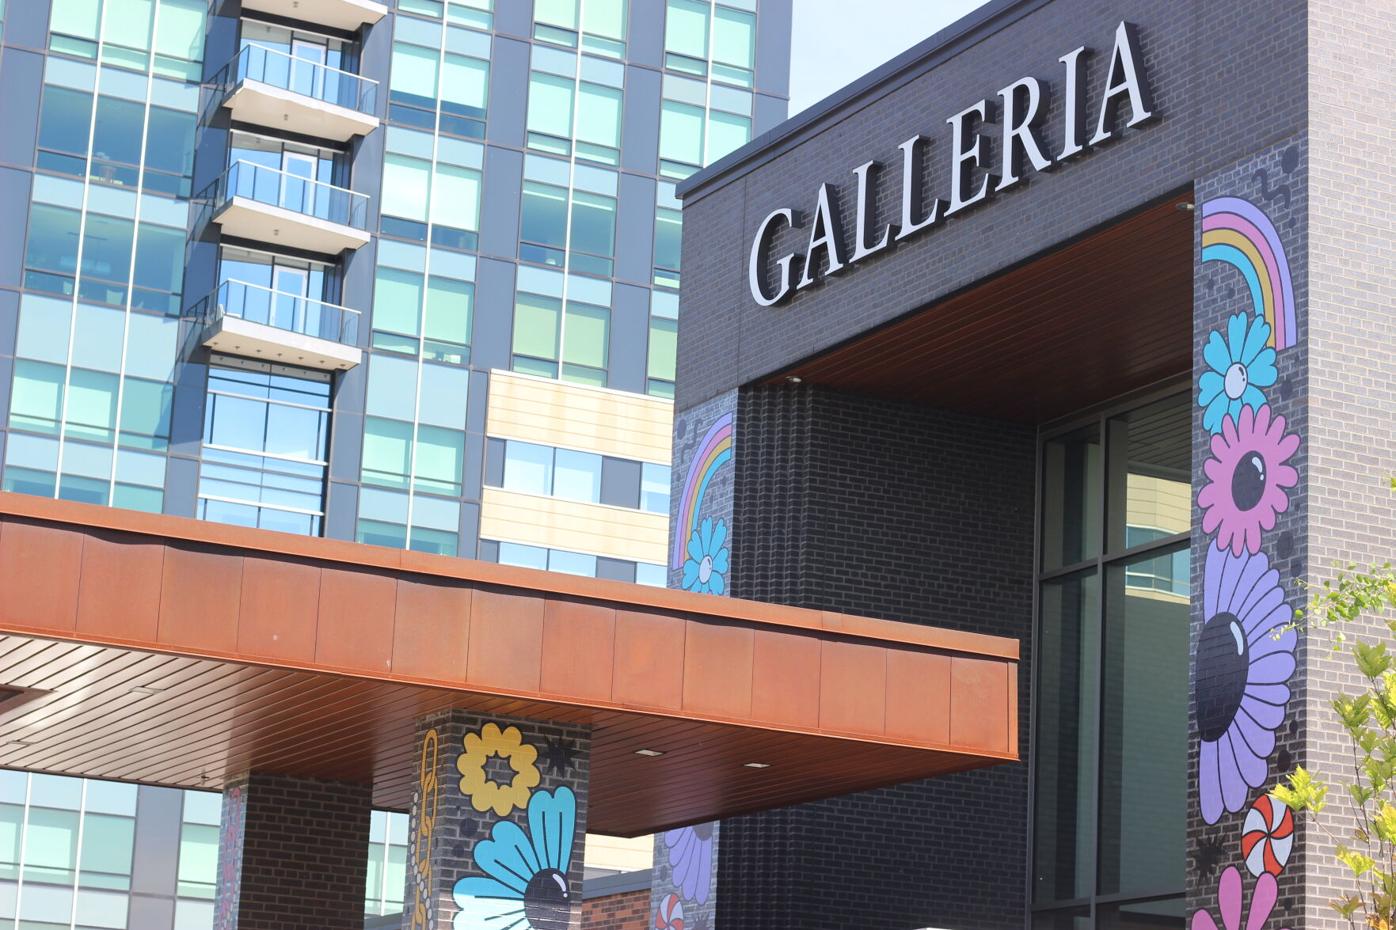 Galleria sells to local investor group for $150M, Edina